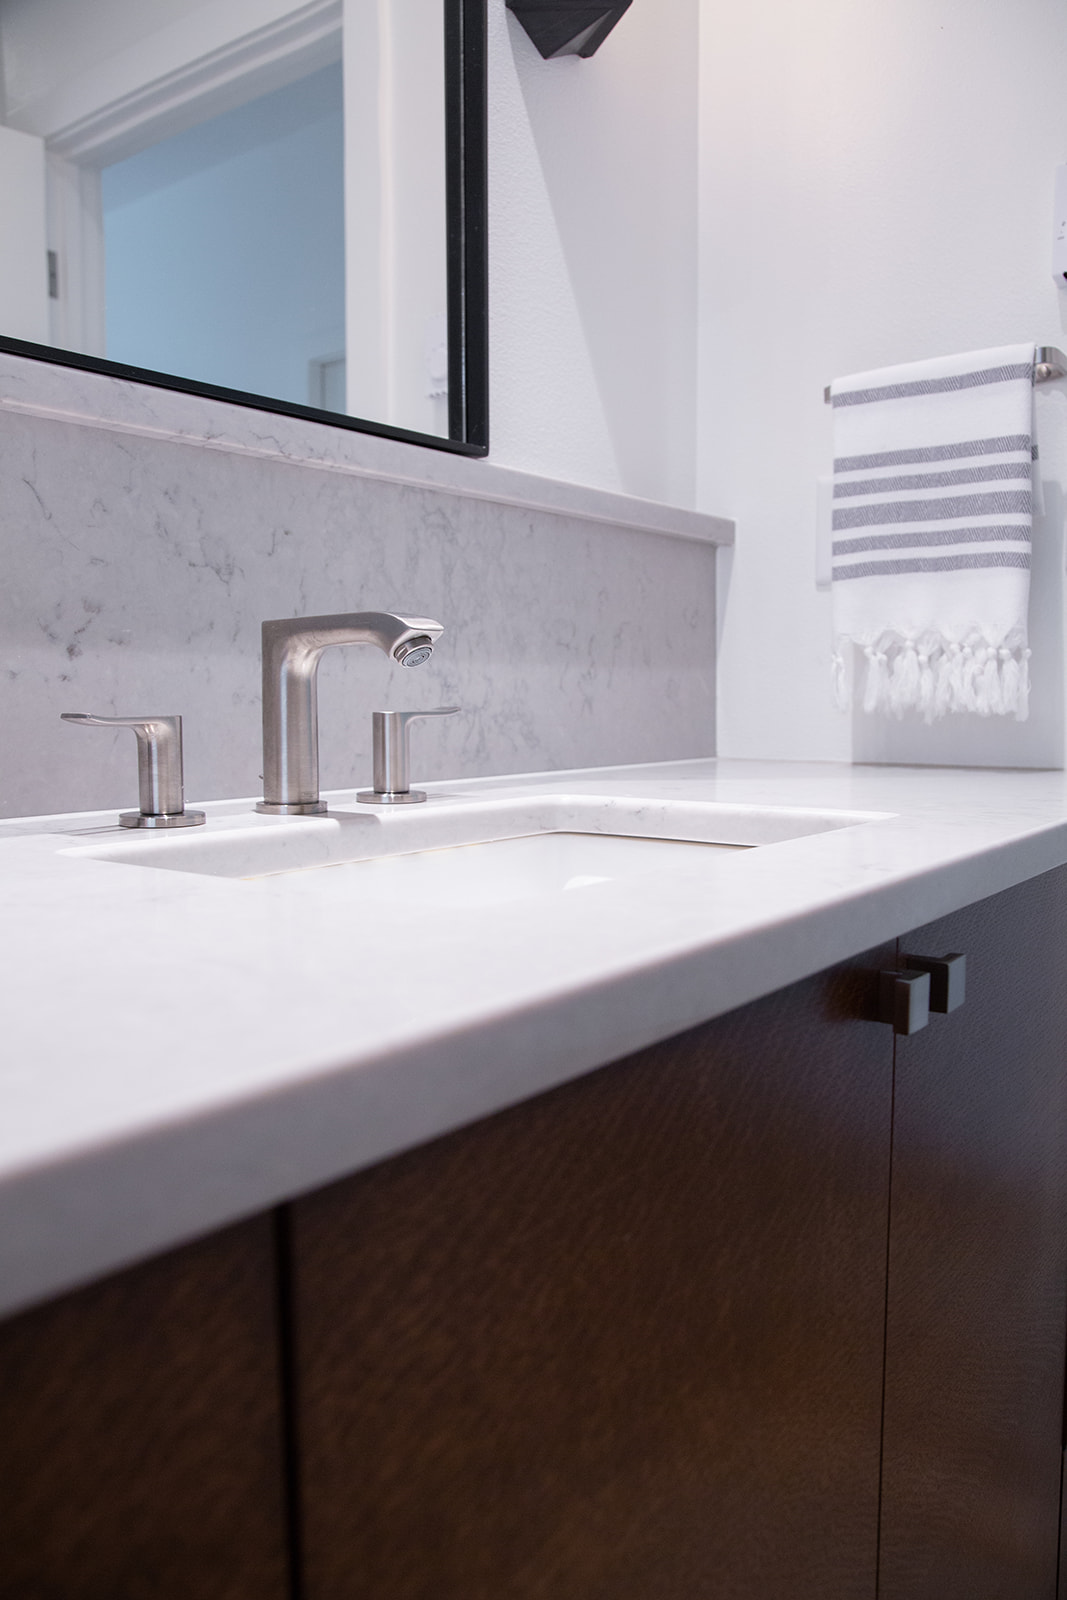 detail shot of the primary bath countertop and framed mirrors